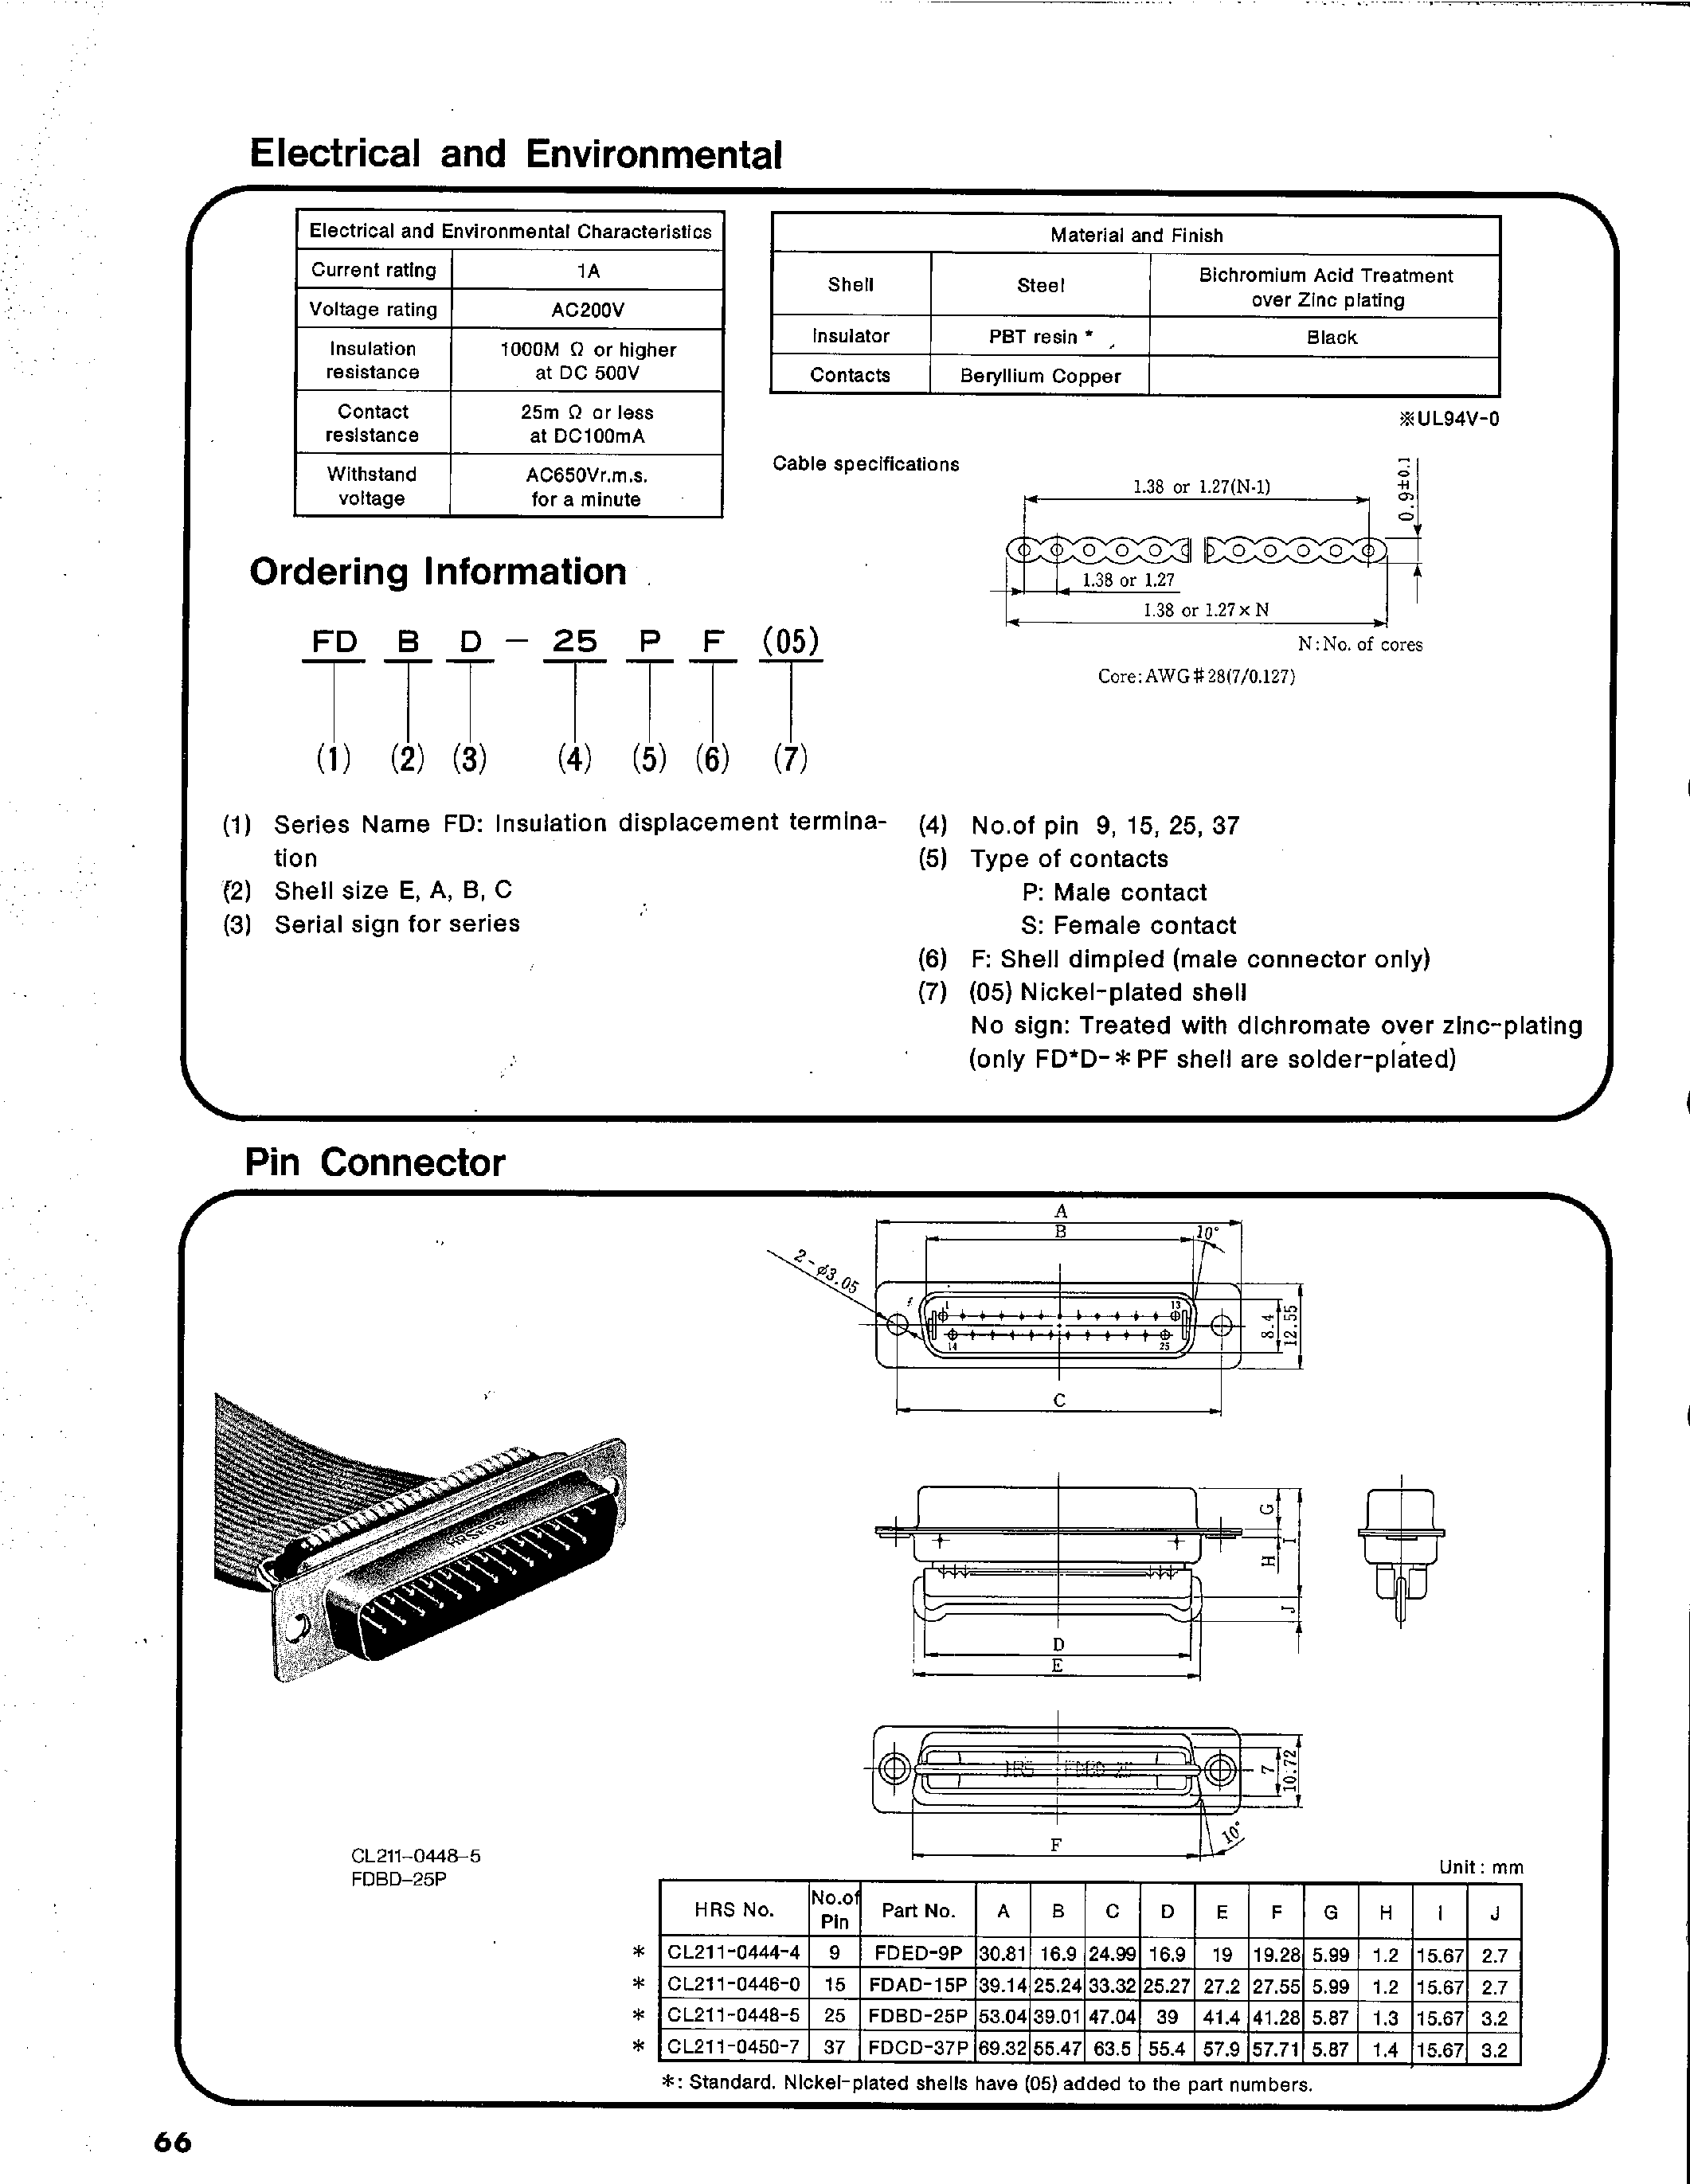 Datasheet FDBD-9PF - RIBBON-CABLE LOW-PROFILE FD CONNECTORS page 2